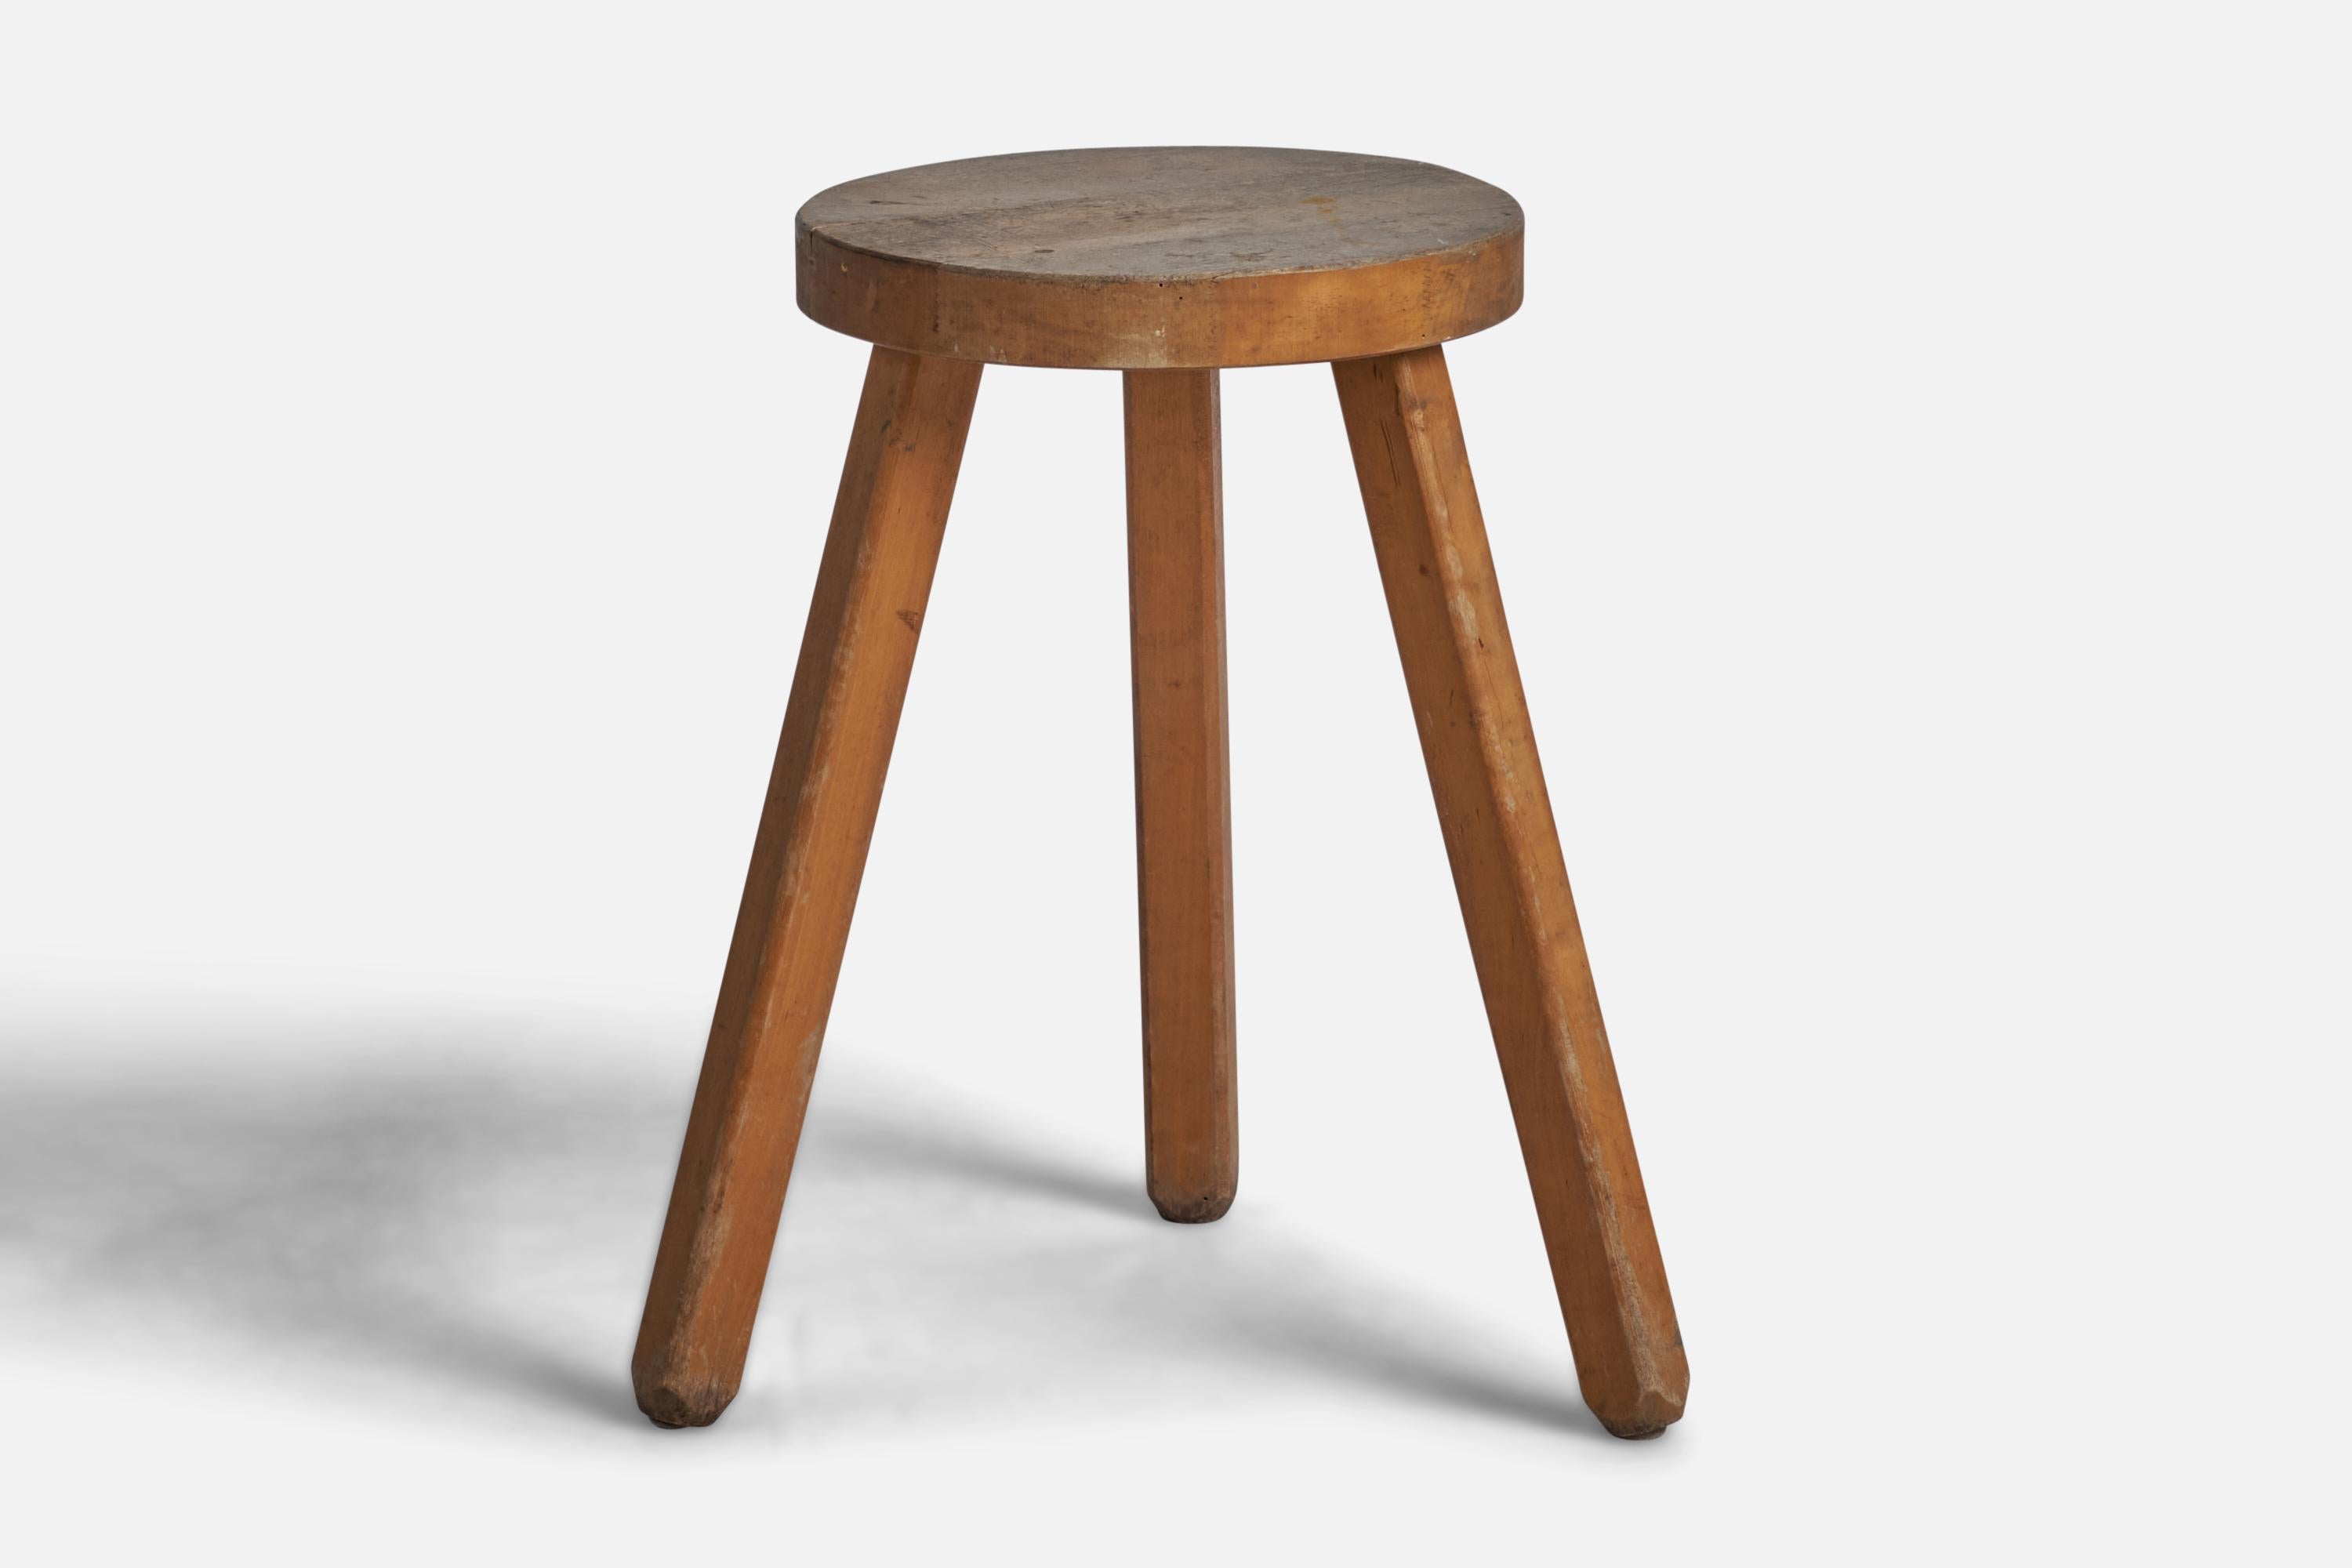 A wood stool designed and produced in Sweden, 1940s.